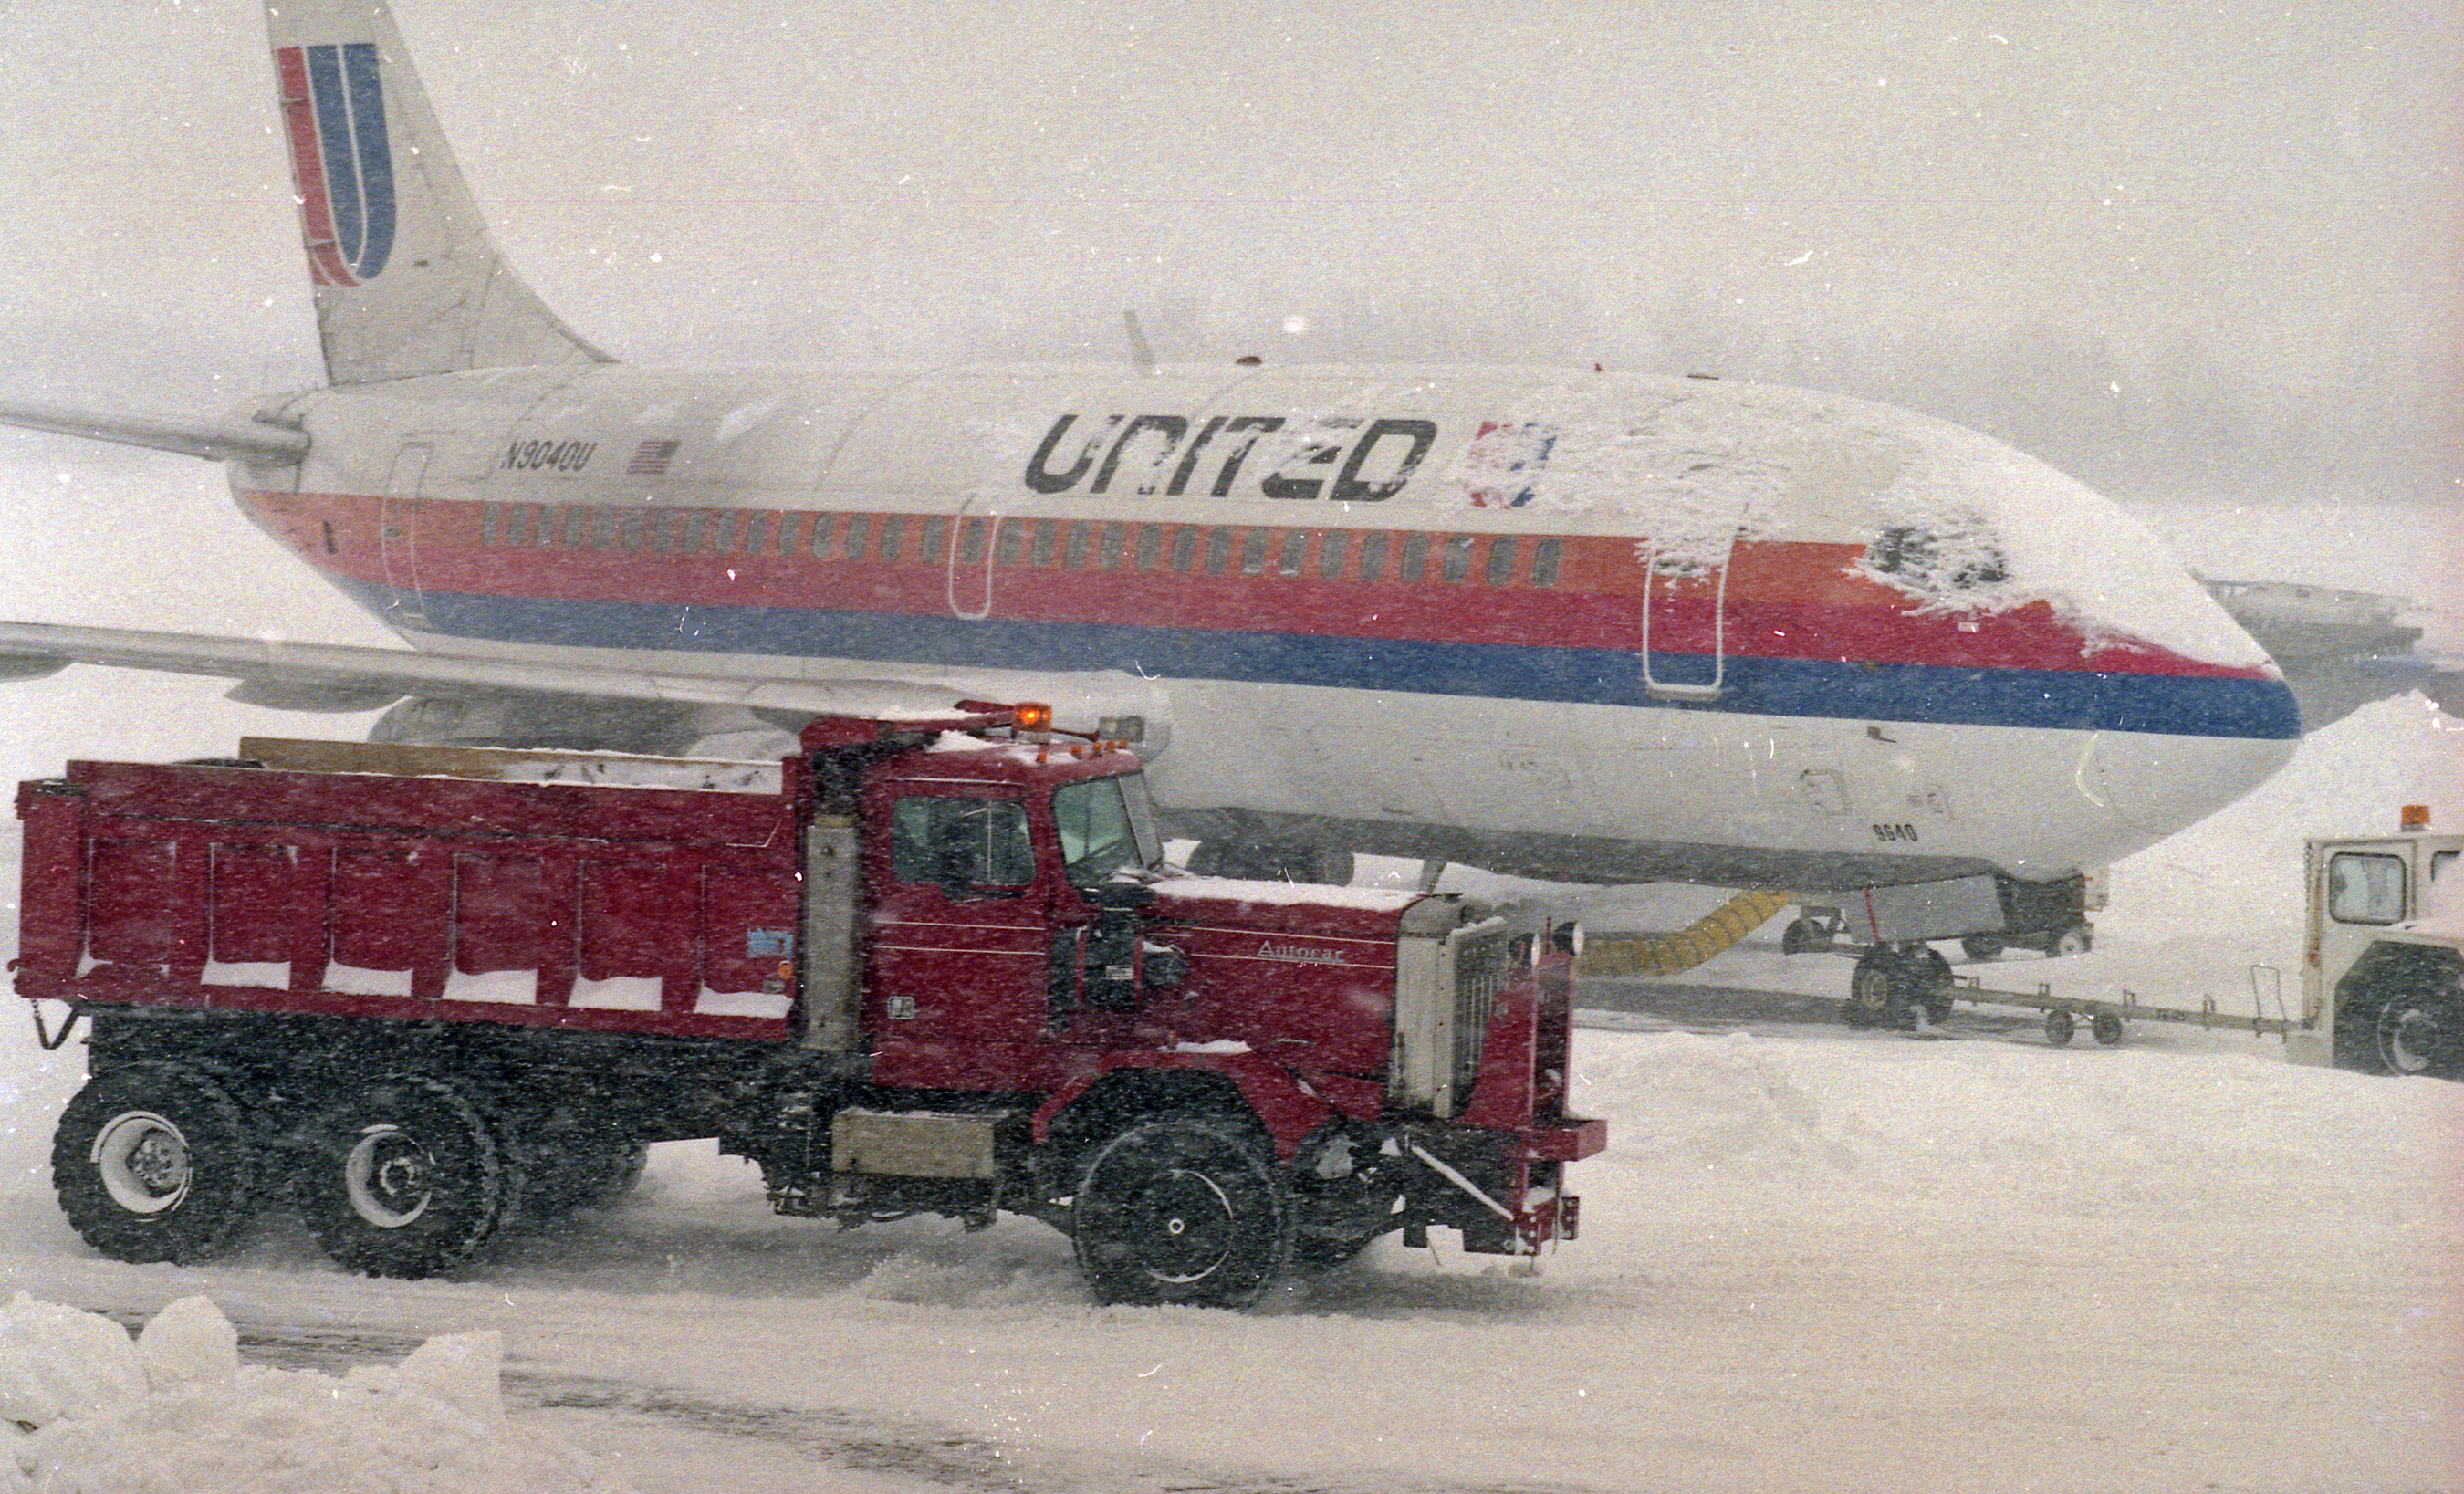 A truck loaded with snow passes a plane at Hancock Airport as crews try to remove snow from the Blizzard of 1993.